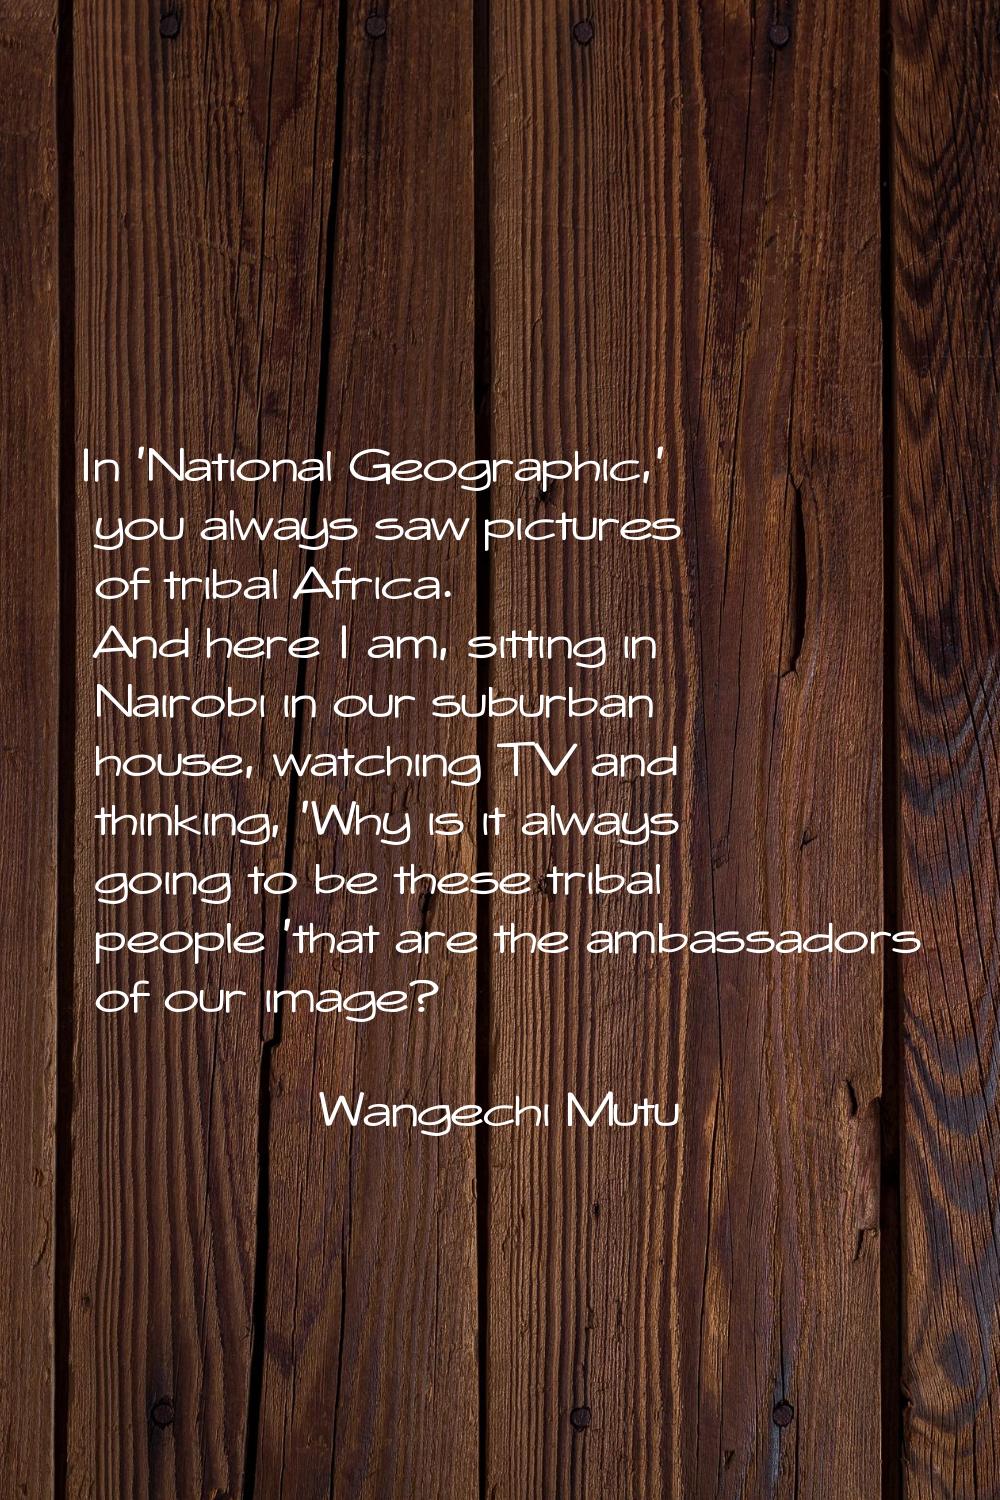 In 'National Geographic,' you always saw pictures of tribal Africa. And here I am, sitting in Nairo